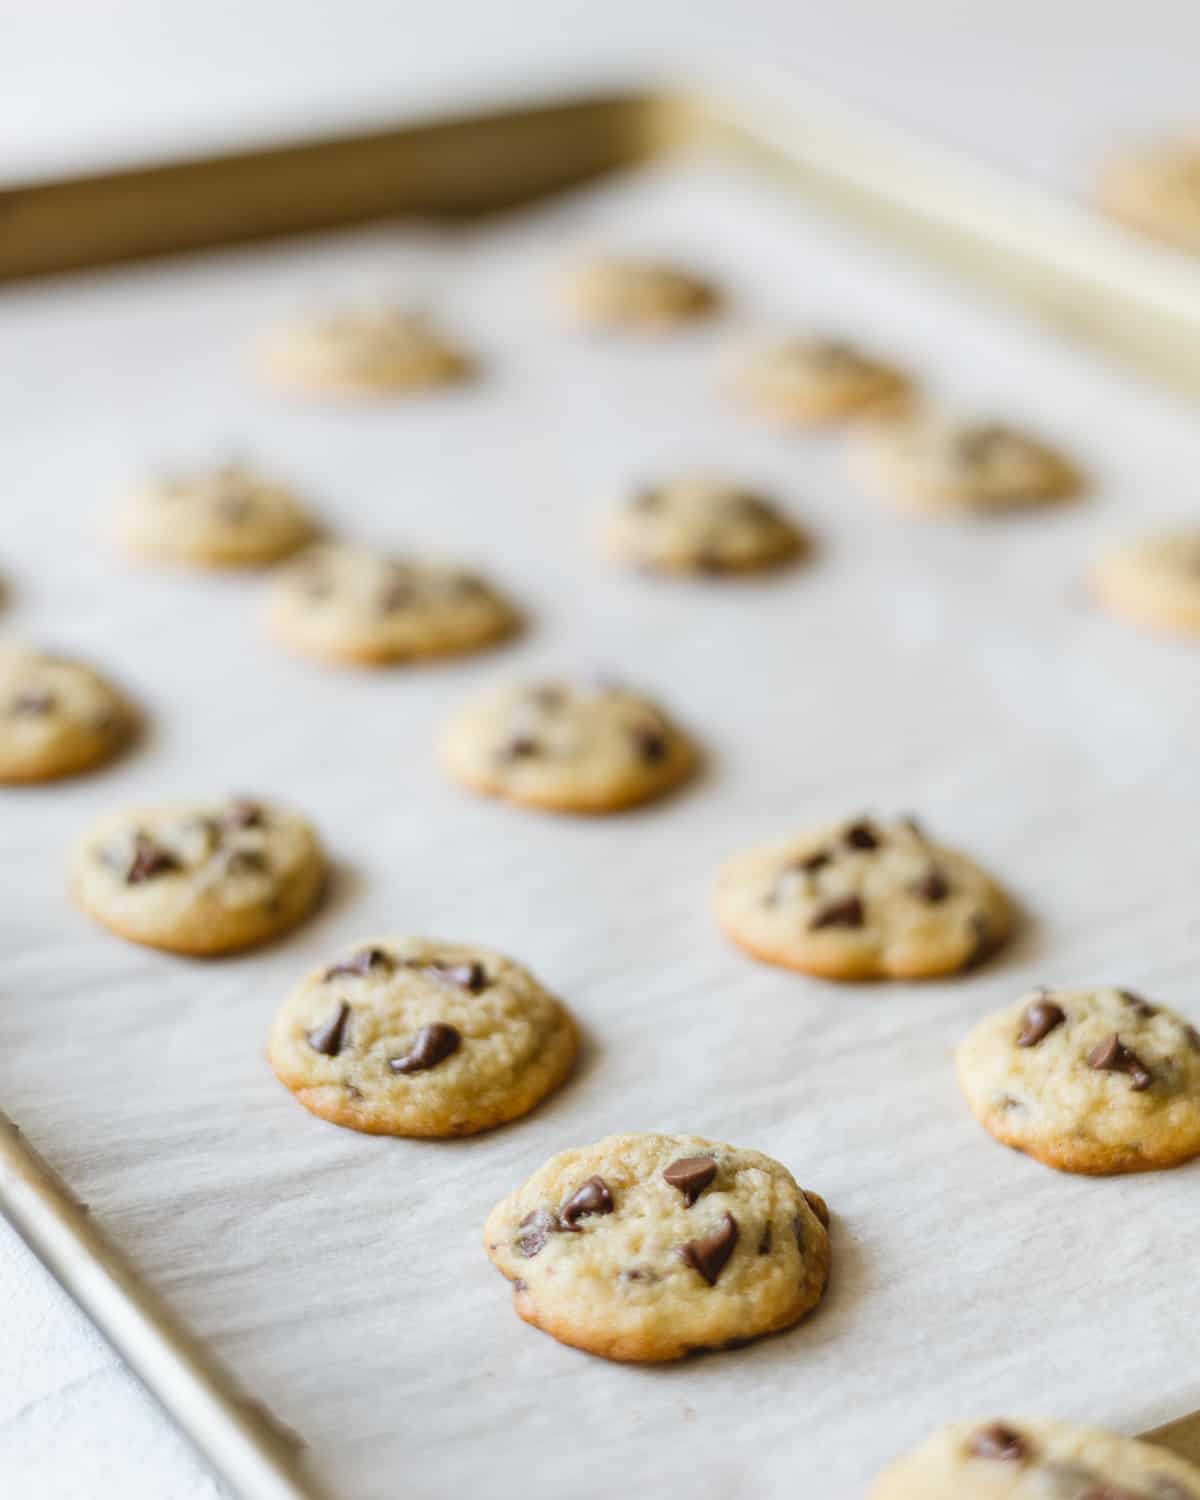 Tiny chocolate chip cookies on a parchment-lined baking sheet.